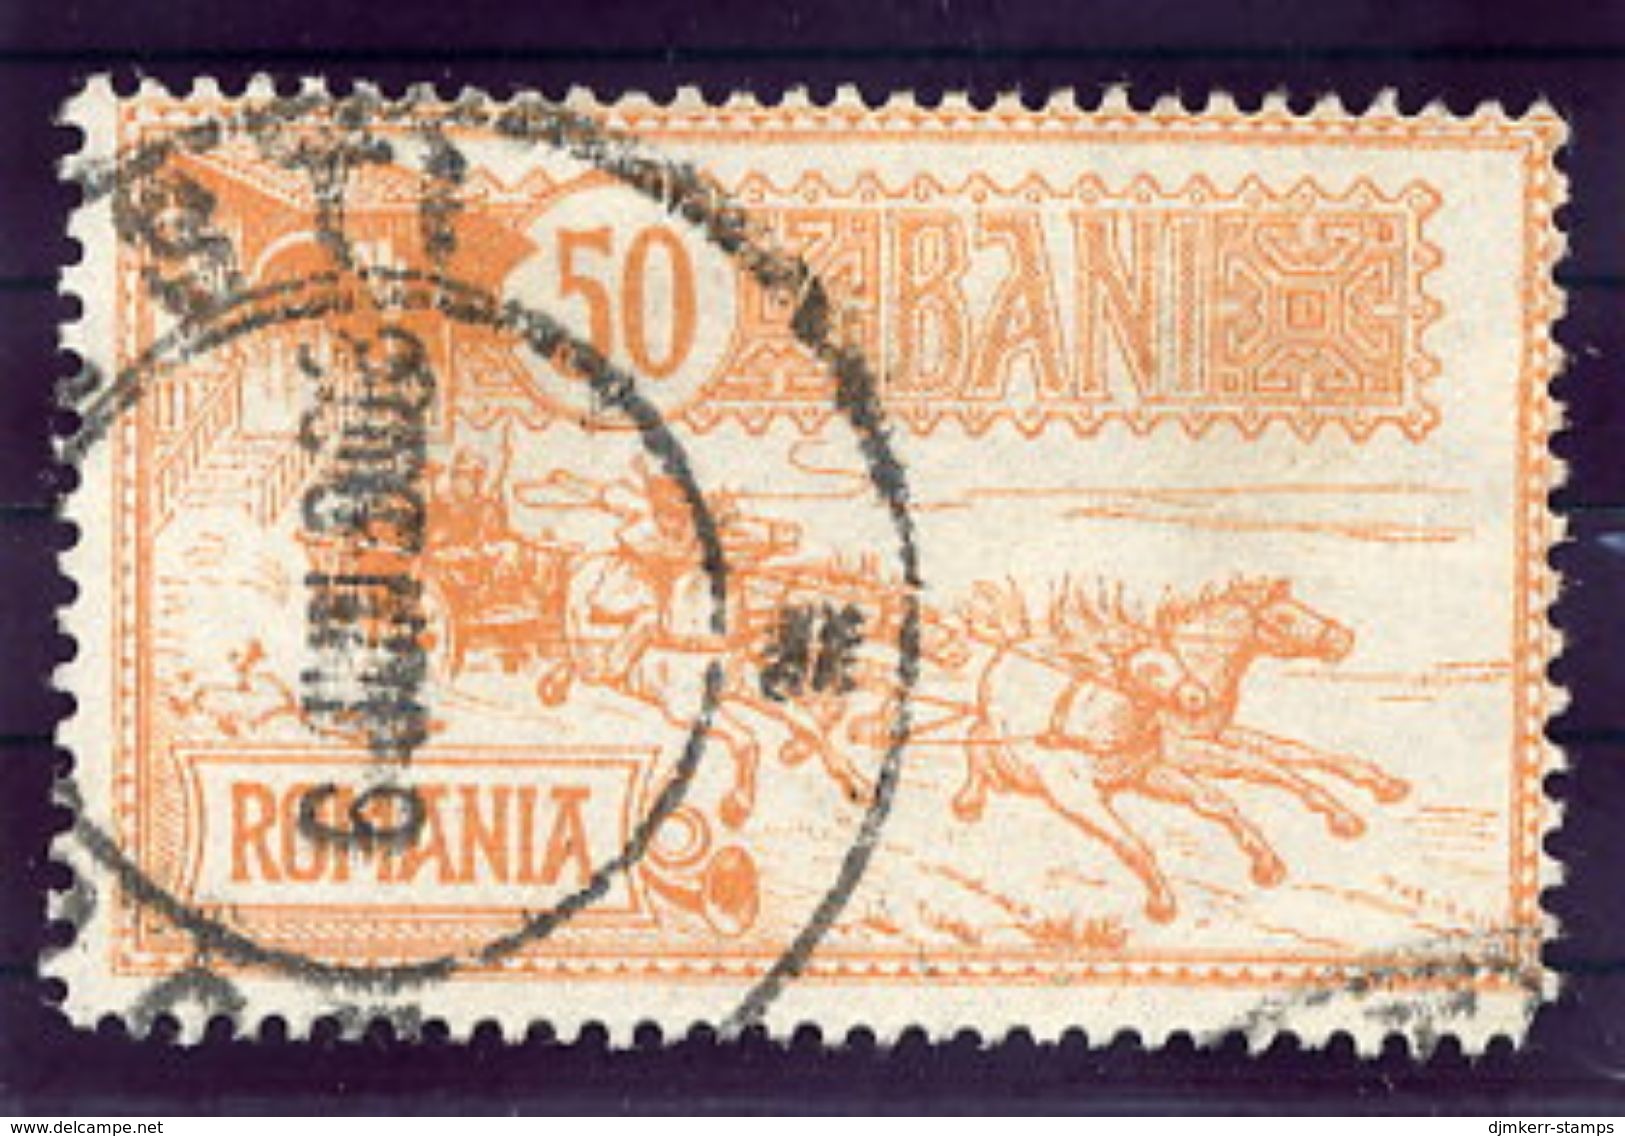 ROMANIA 1903 Opening Of Post Office Building  50 B. Used.  Michel 153 - Used Stamps